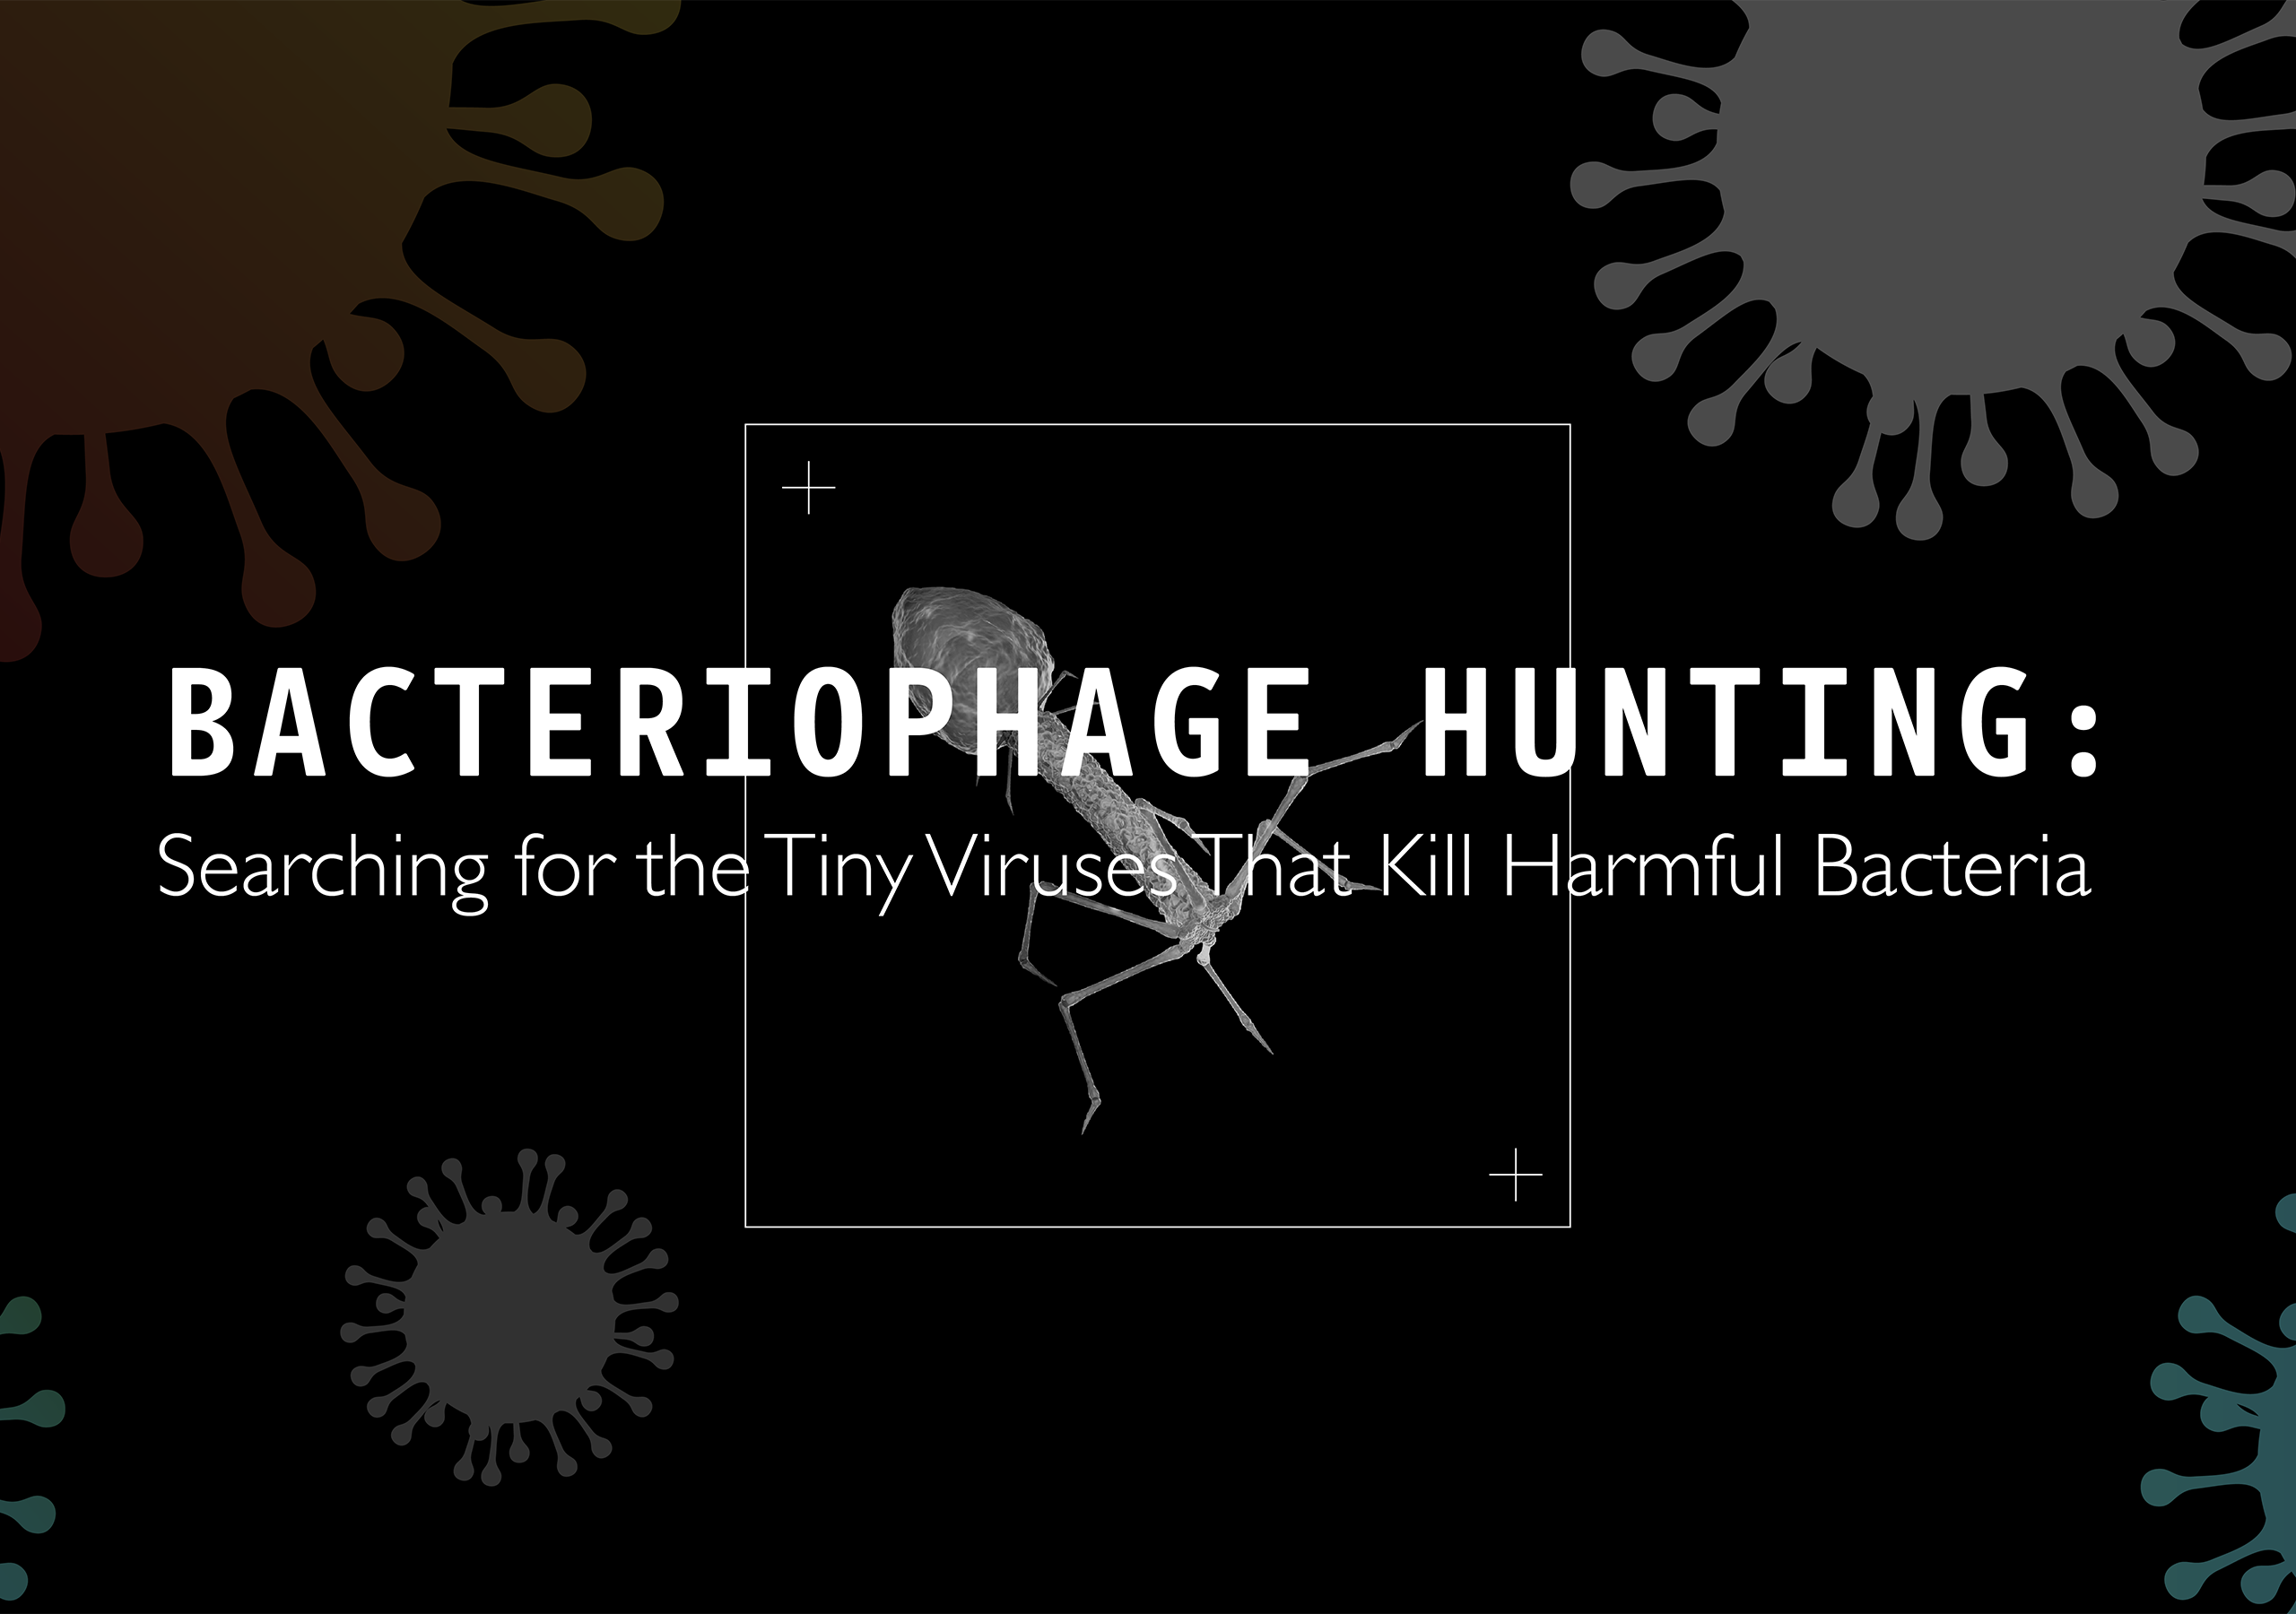 Dr Kristin Parent | Bacteriophage Hunting: Searching for the Tiny Viruses That Kill Harmful Bacteria